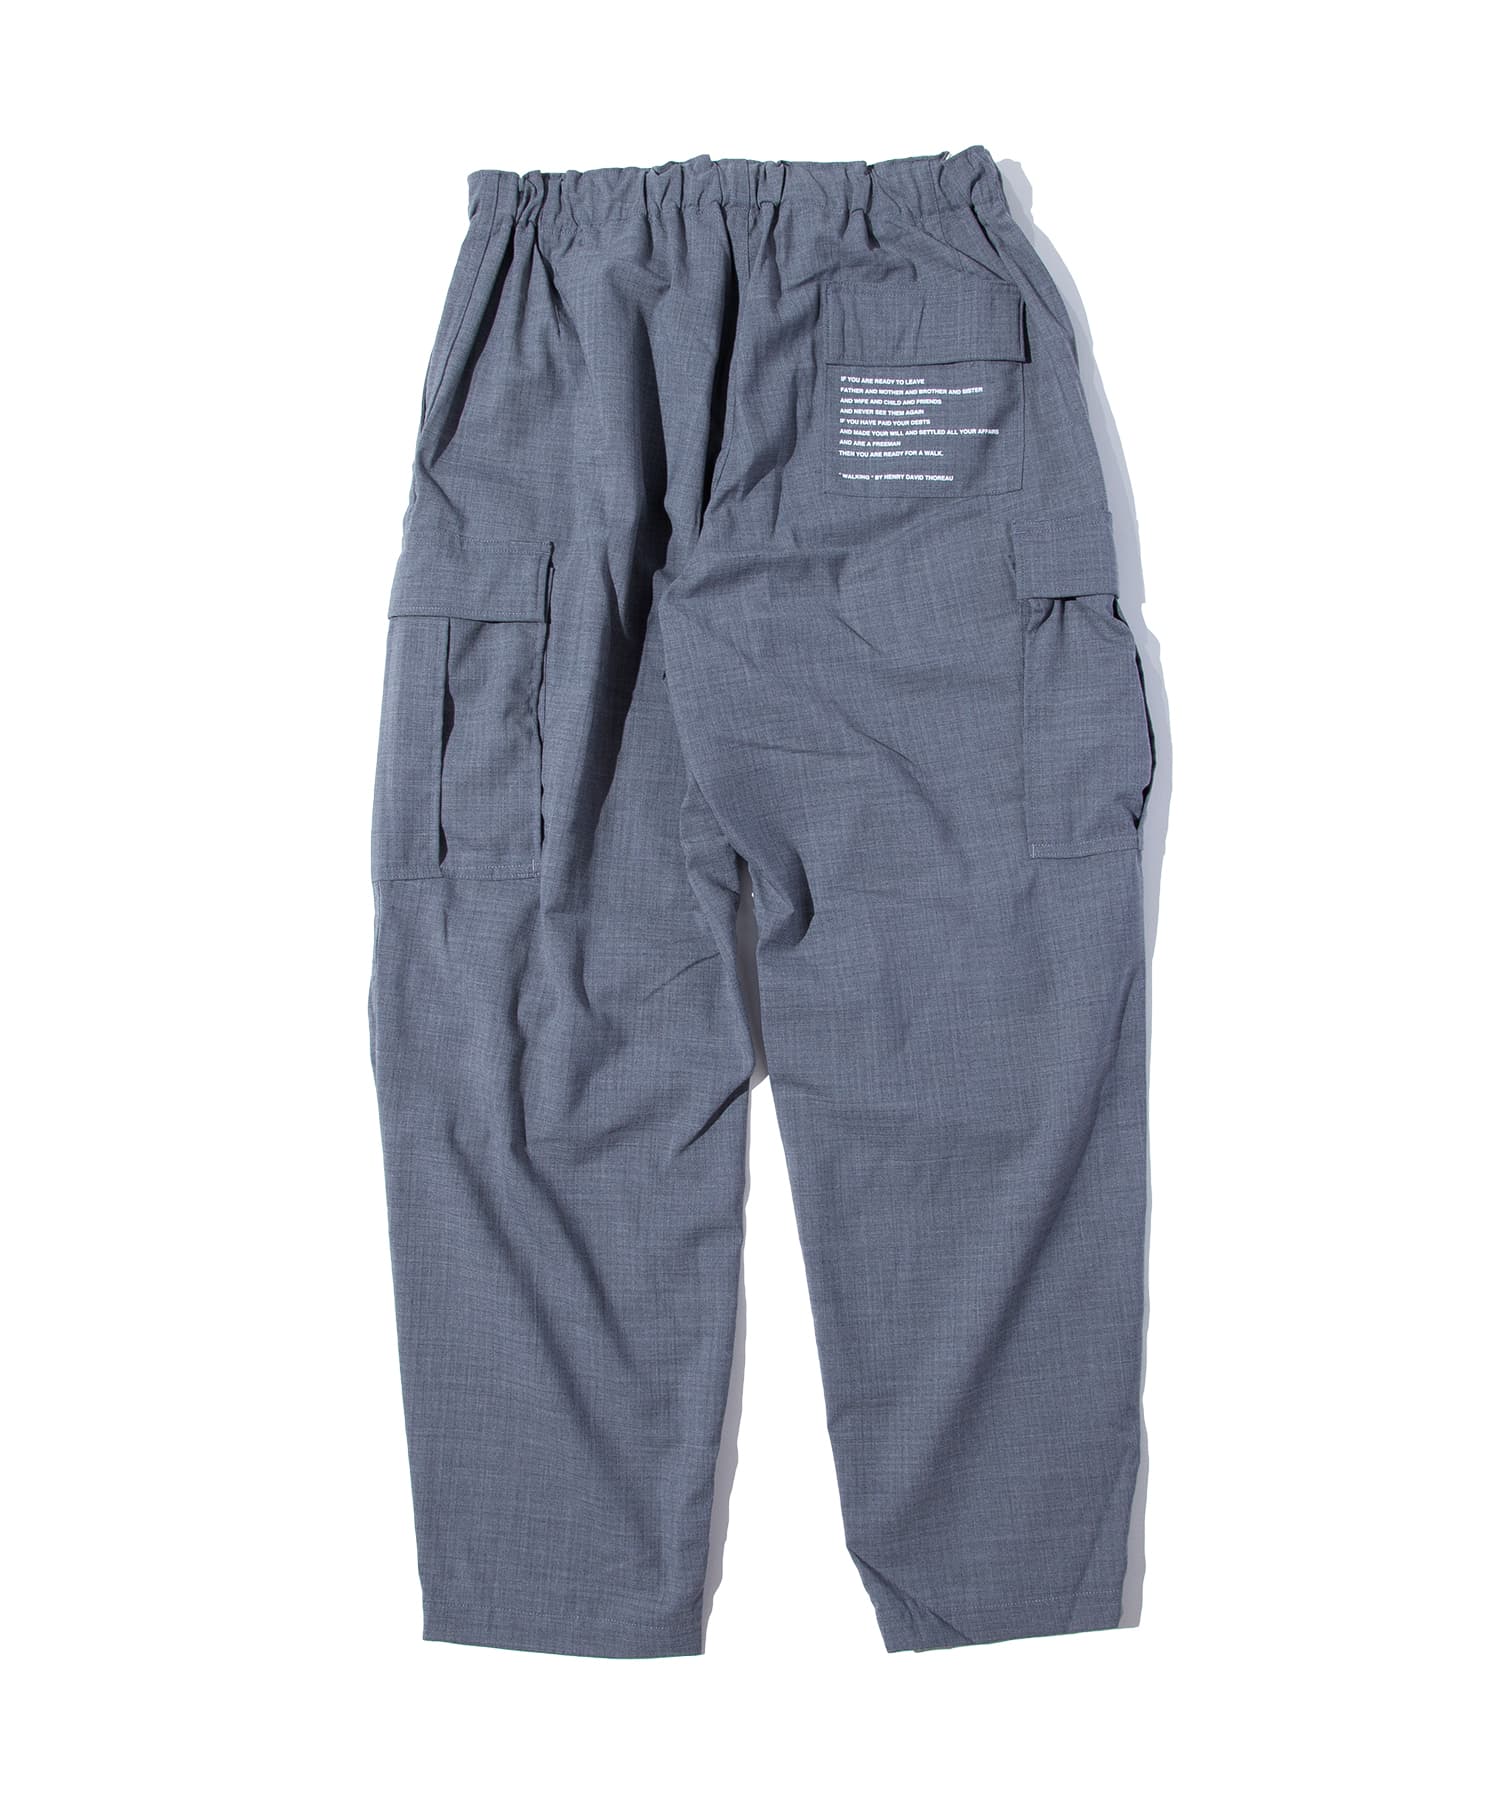 MOUNTAIN RESEARCH MT CARGO PANTS / マウンテンリサーチ MT カーゴ